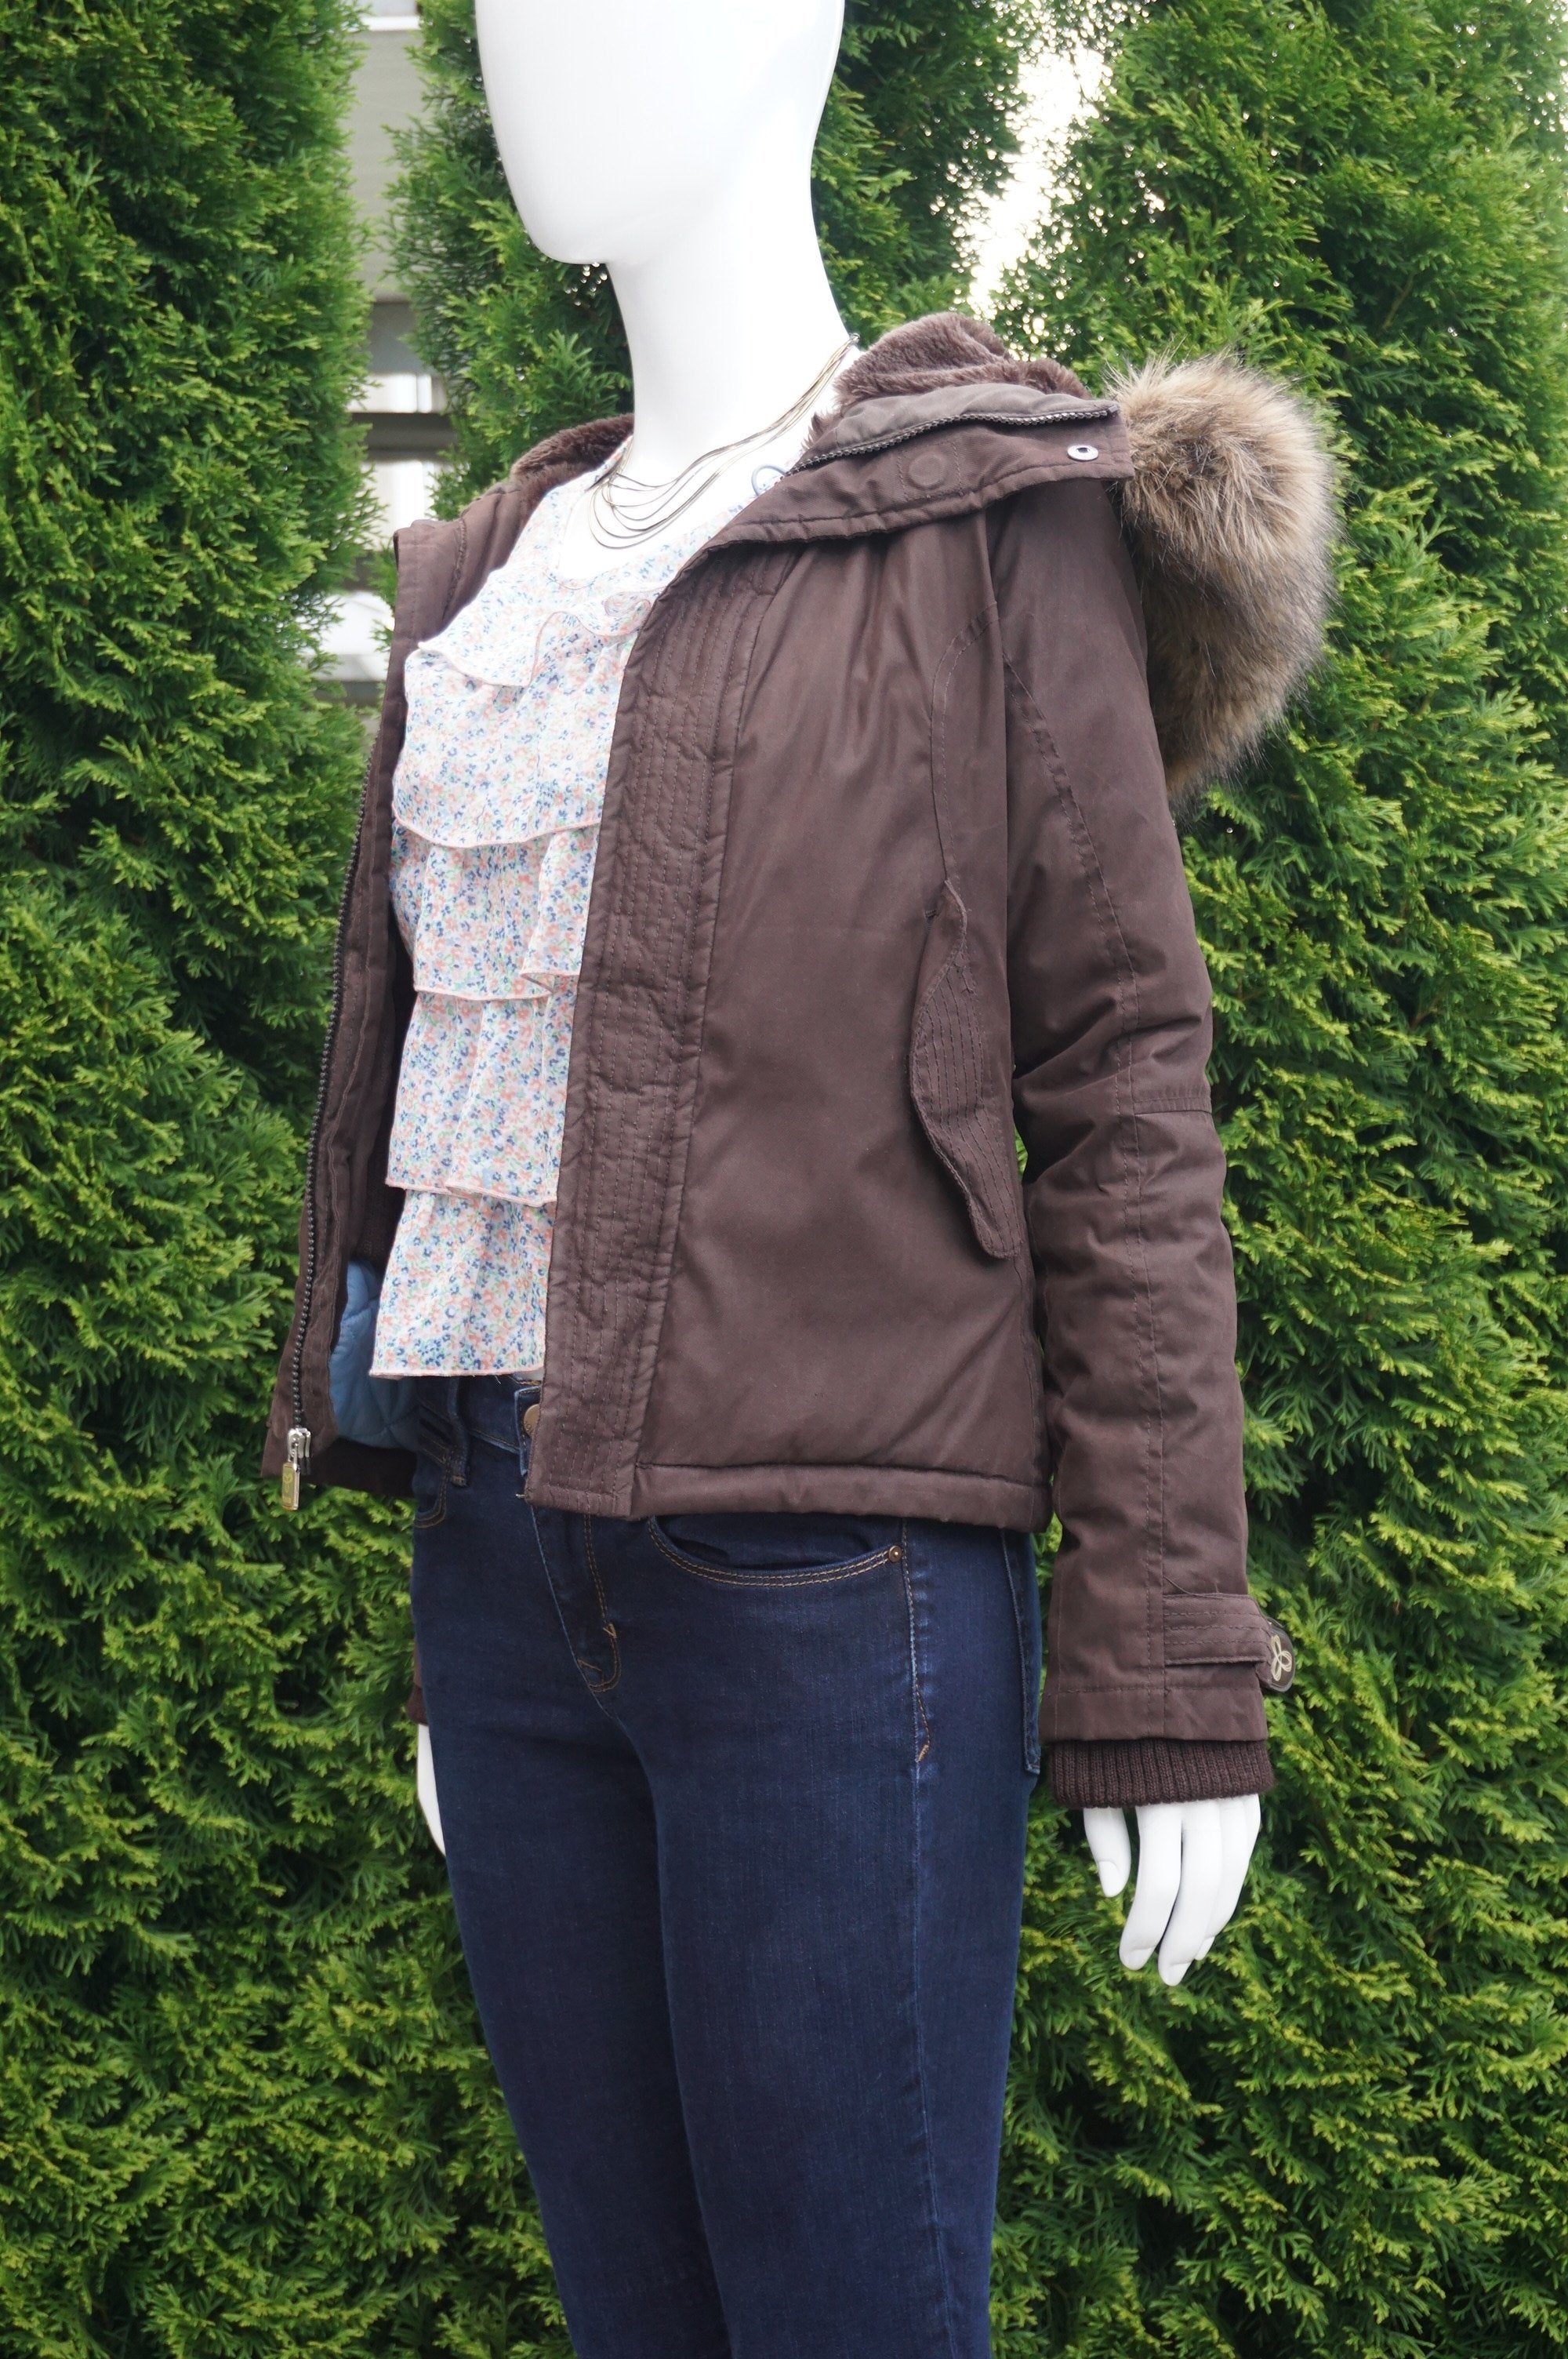 TNA Super warm hooded winter jacket, Bust 36 inches, waist 30 inches, length   inches. Signs of wearing at trims but all zippers and buttons work well. Removable faux fur hood. , Brown, Exterior: 88% Polyester, 12% Nylon. Backing: 100% Polyurethane. Upper lining: 100% Polyester, Lower Body and sleeve lining|: 100% Nylon. Filling 100% Polyester. , women's Jackets & Coats, women's Brown Jackets & Coats, TNA women's Jackets & Coats, Warm winter jacket, TNA jacket, hooded jacket, 